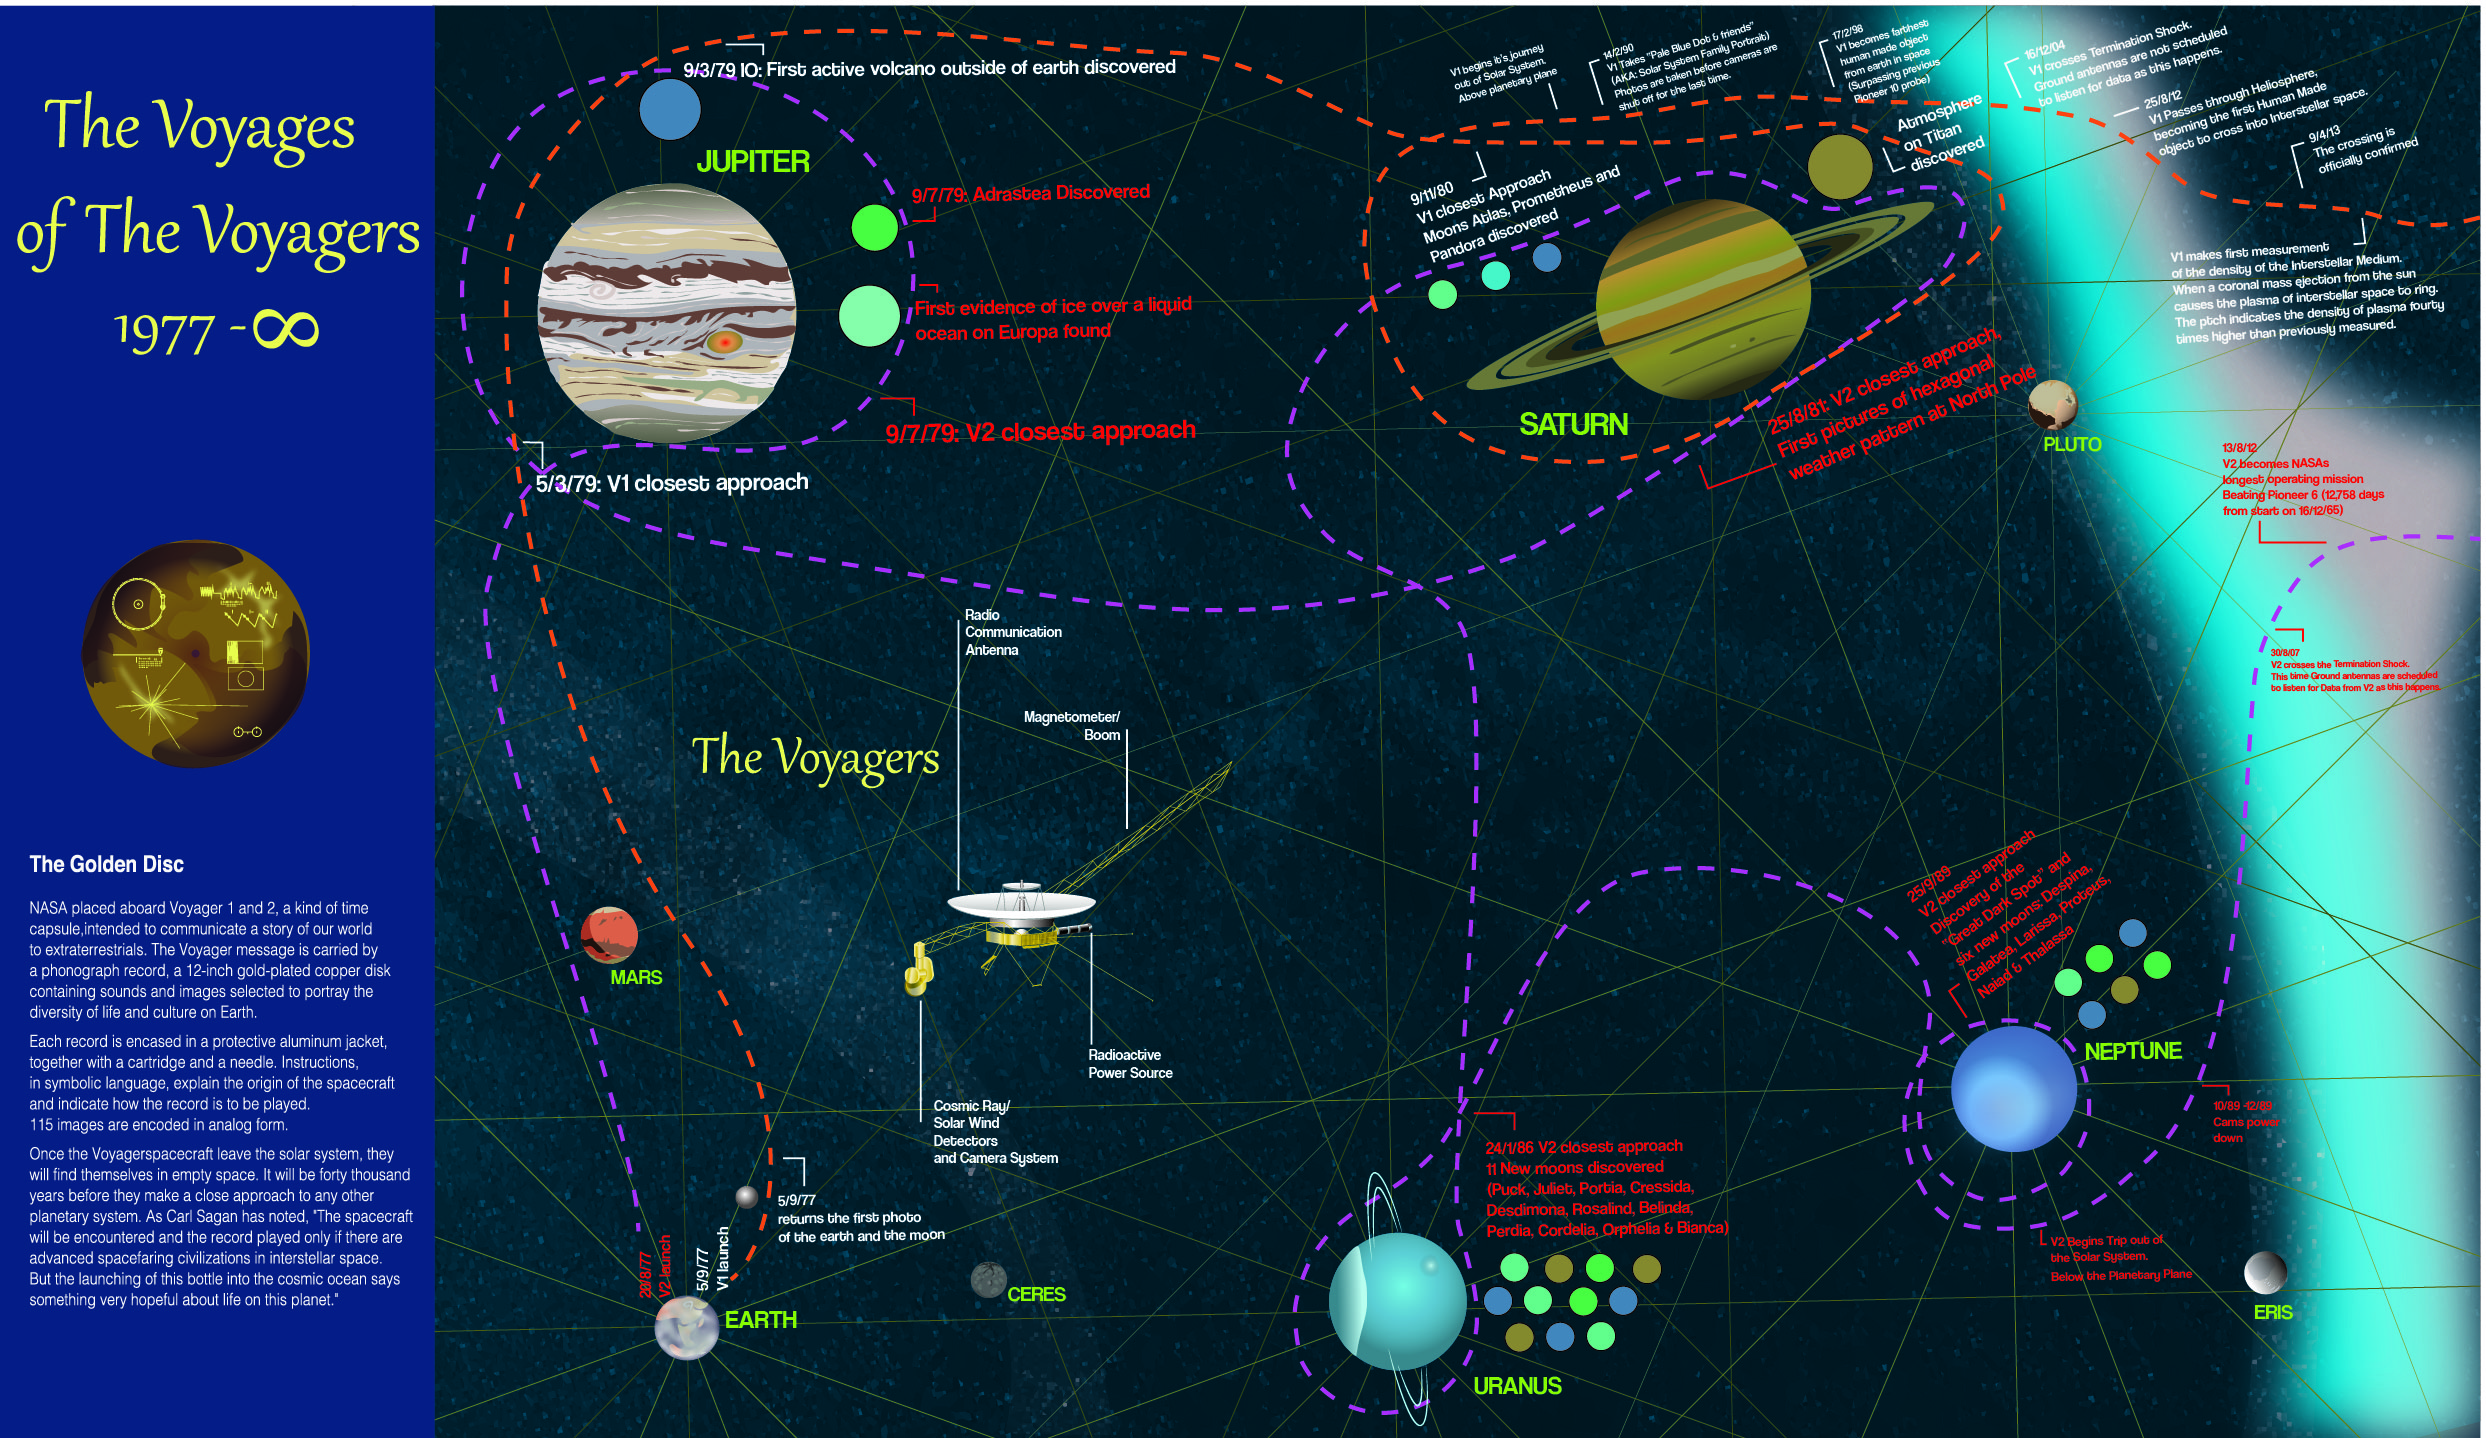 Voyages of the Voyagers Infographic